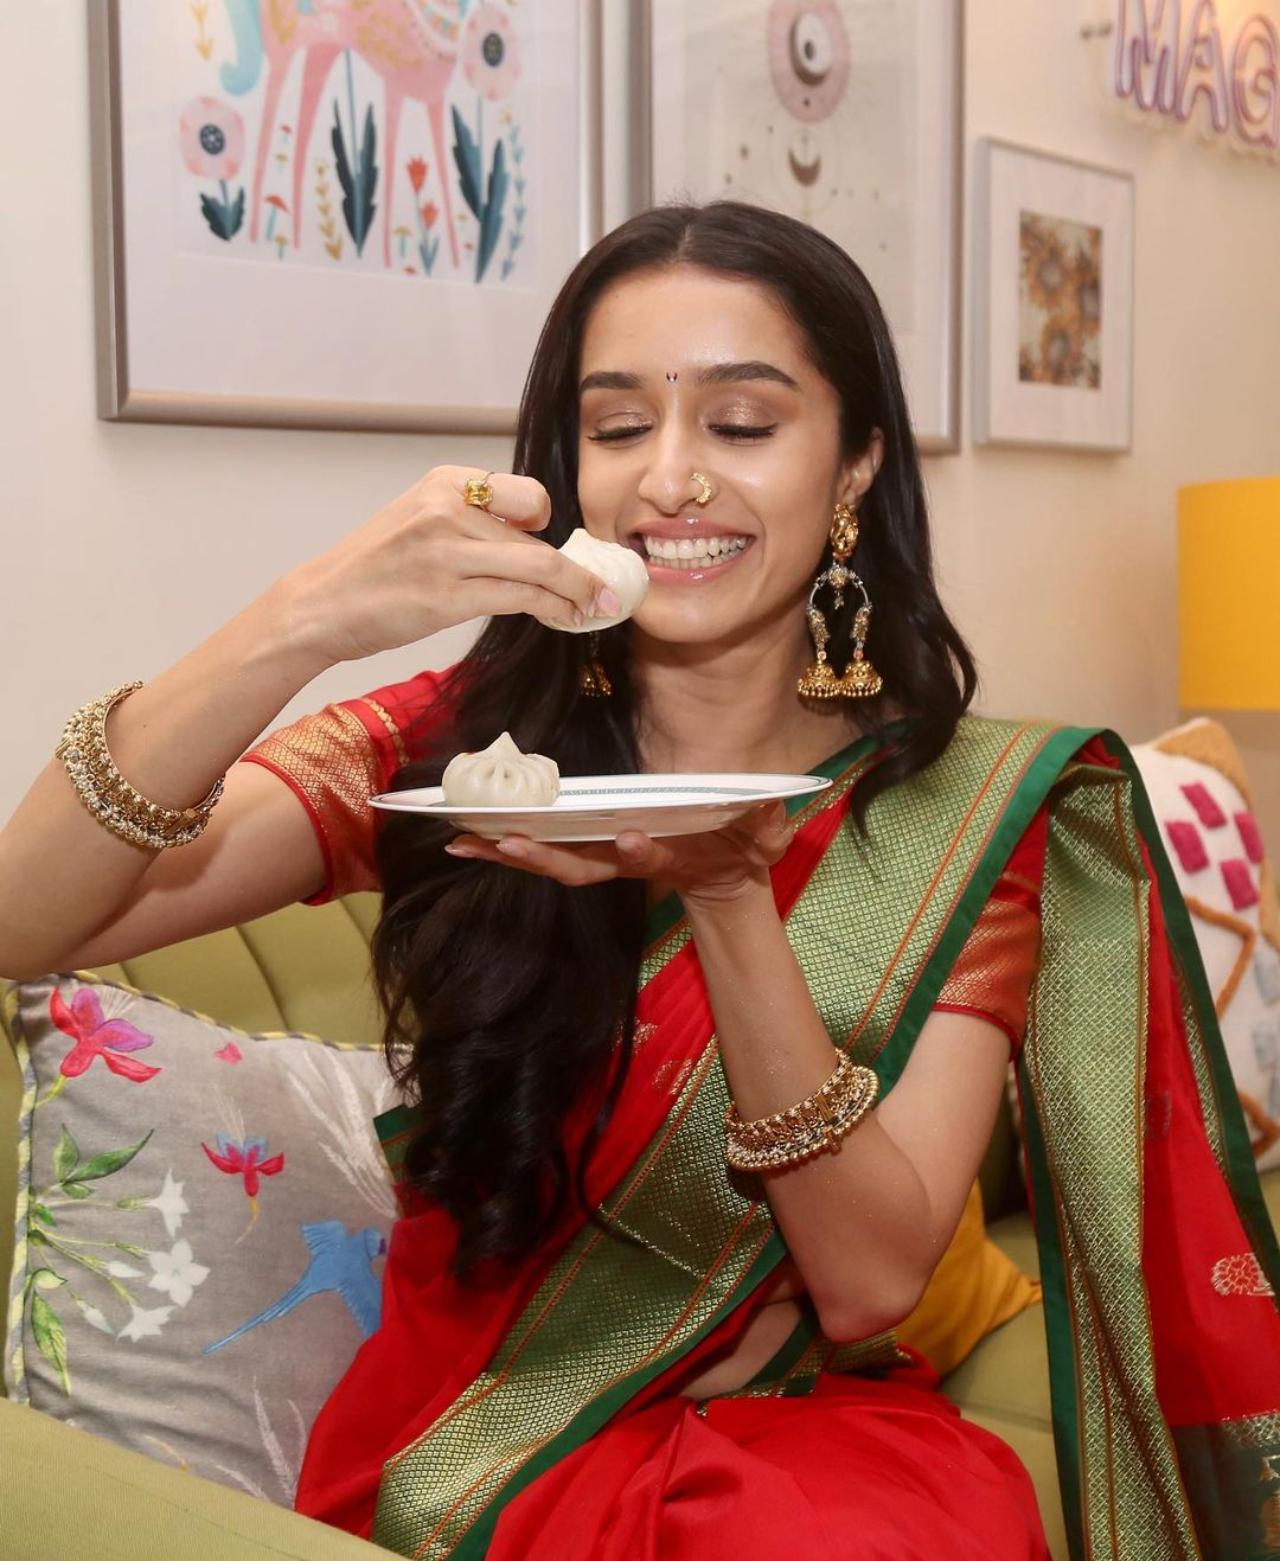 In one of the pictures, Shraddha can be seen giving a wide smile as she held a plate of modak